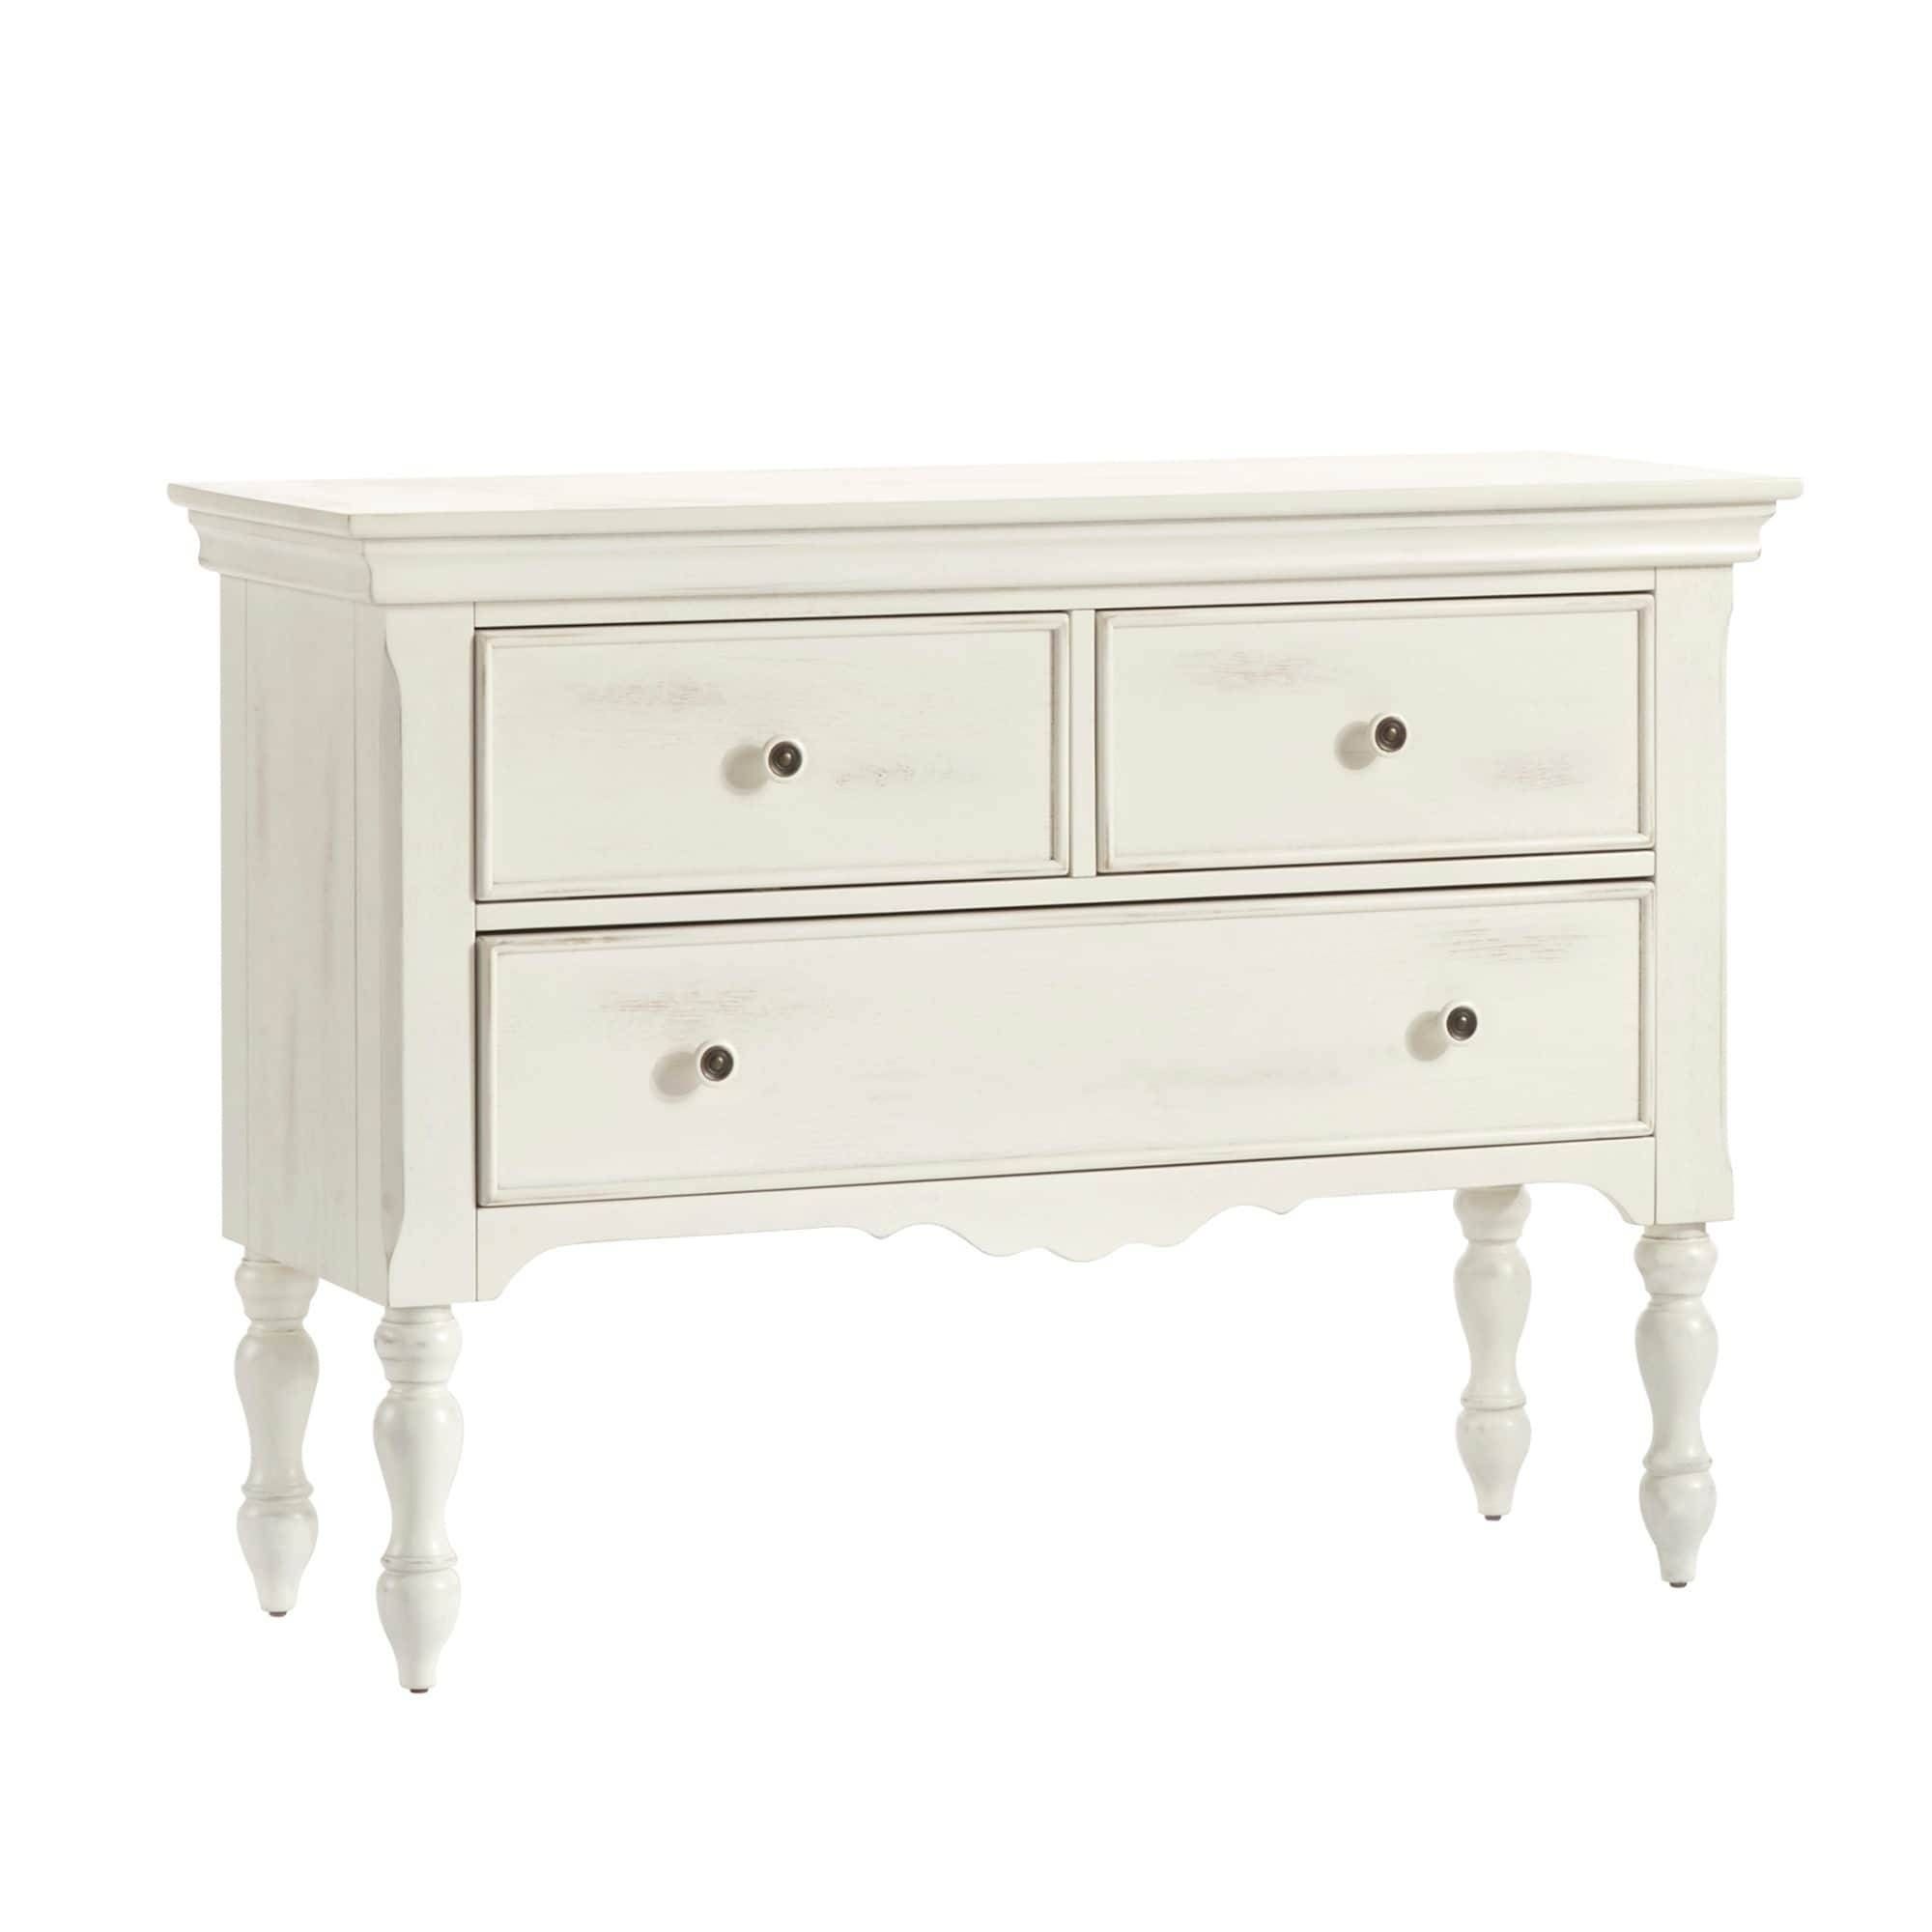 Mckay Country Antique White Buffet Storage Serverinspire Q For Current White Sideboard Tables (Photo 14 of 15)